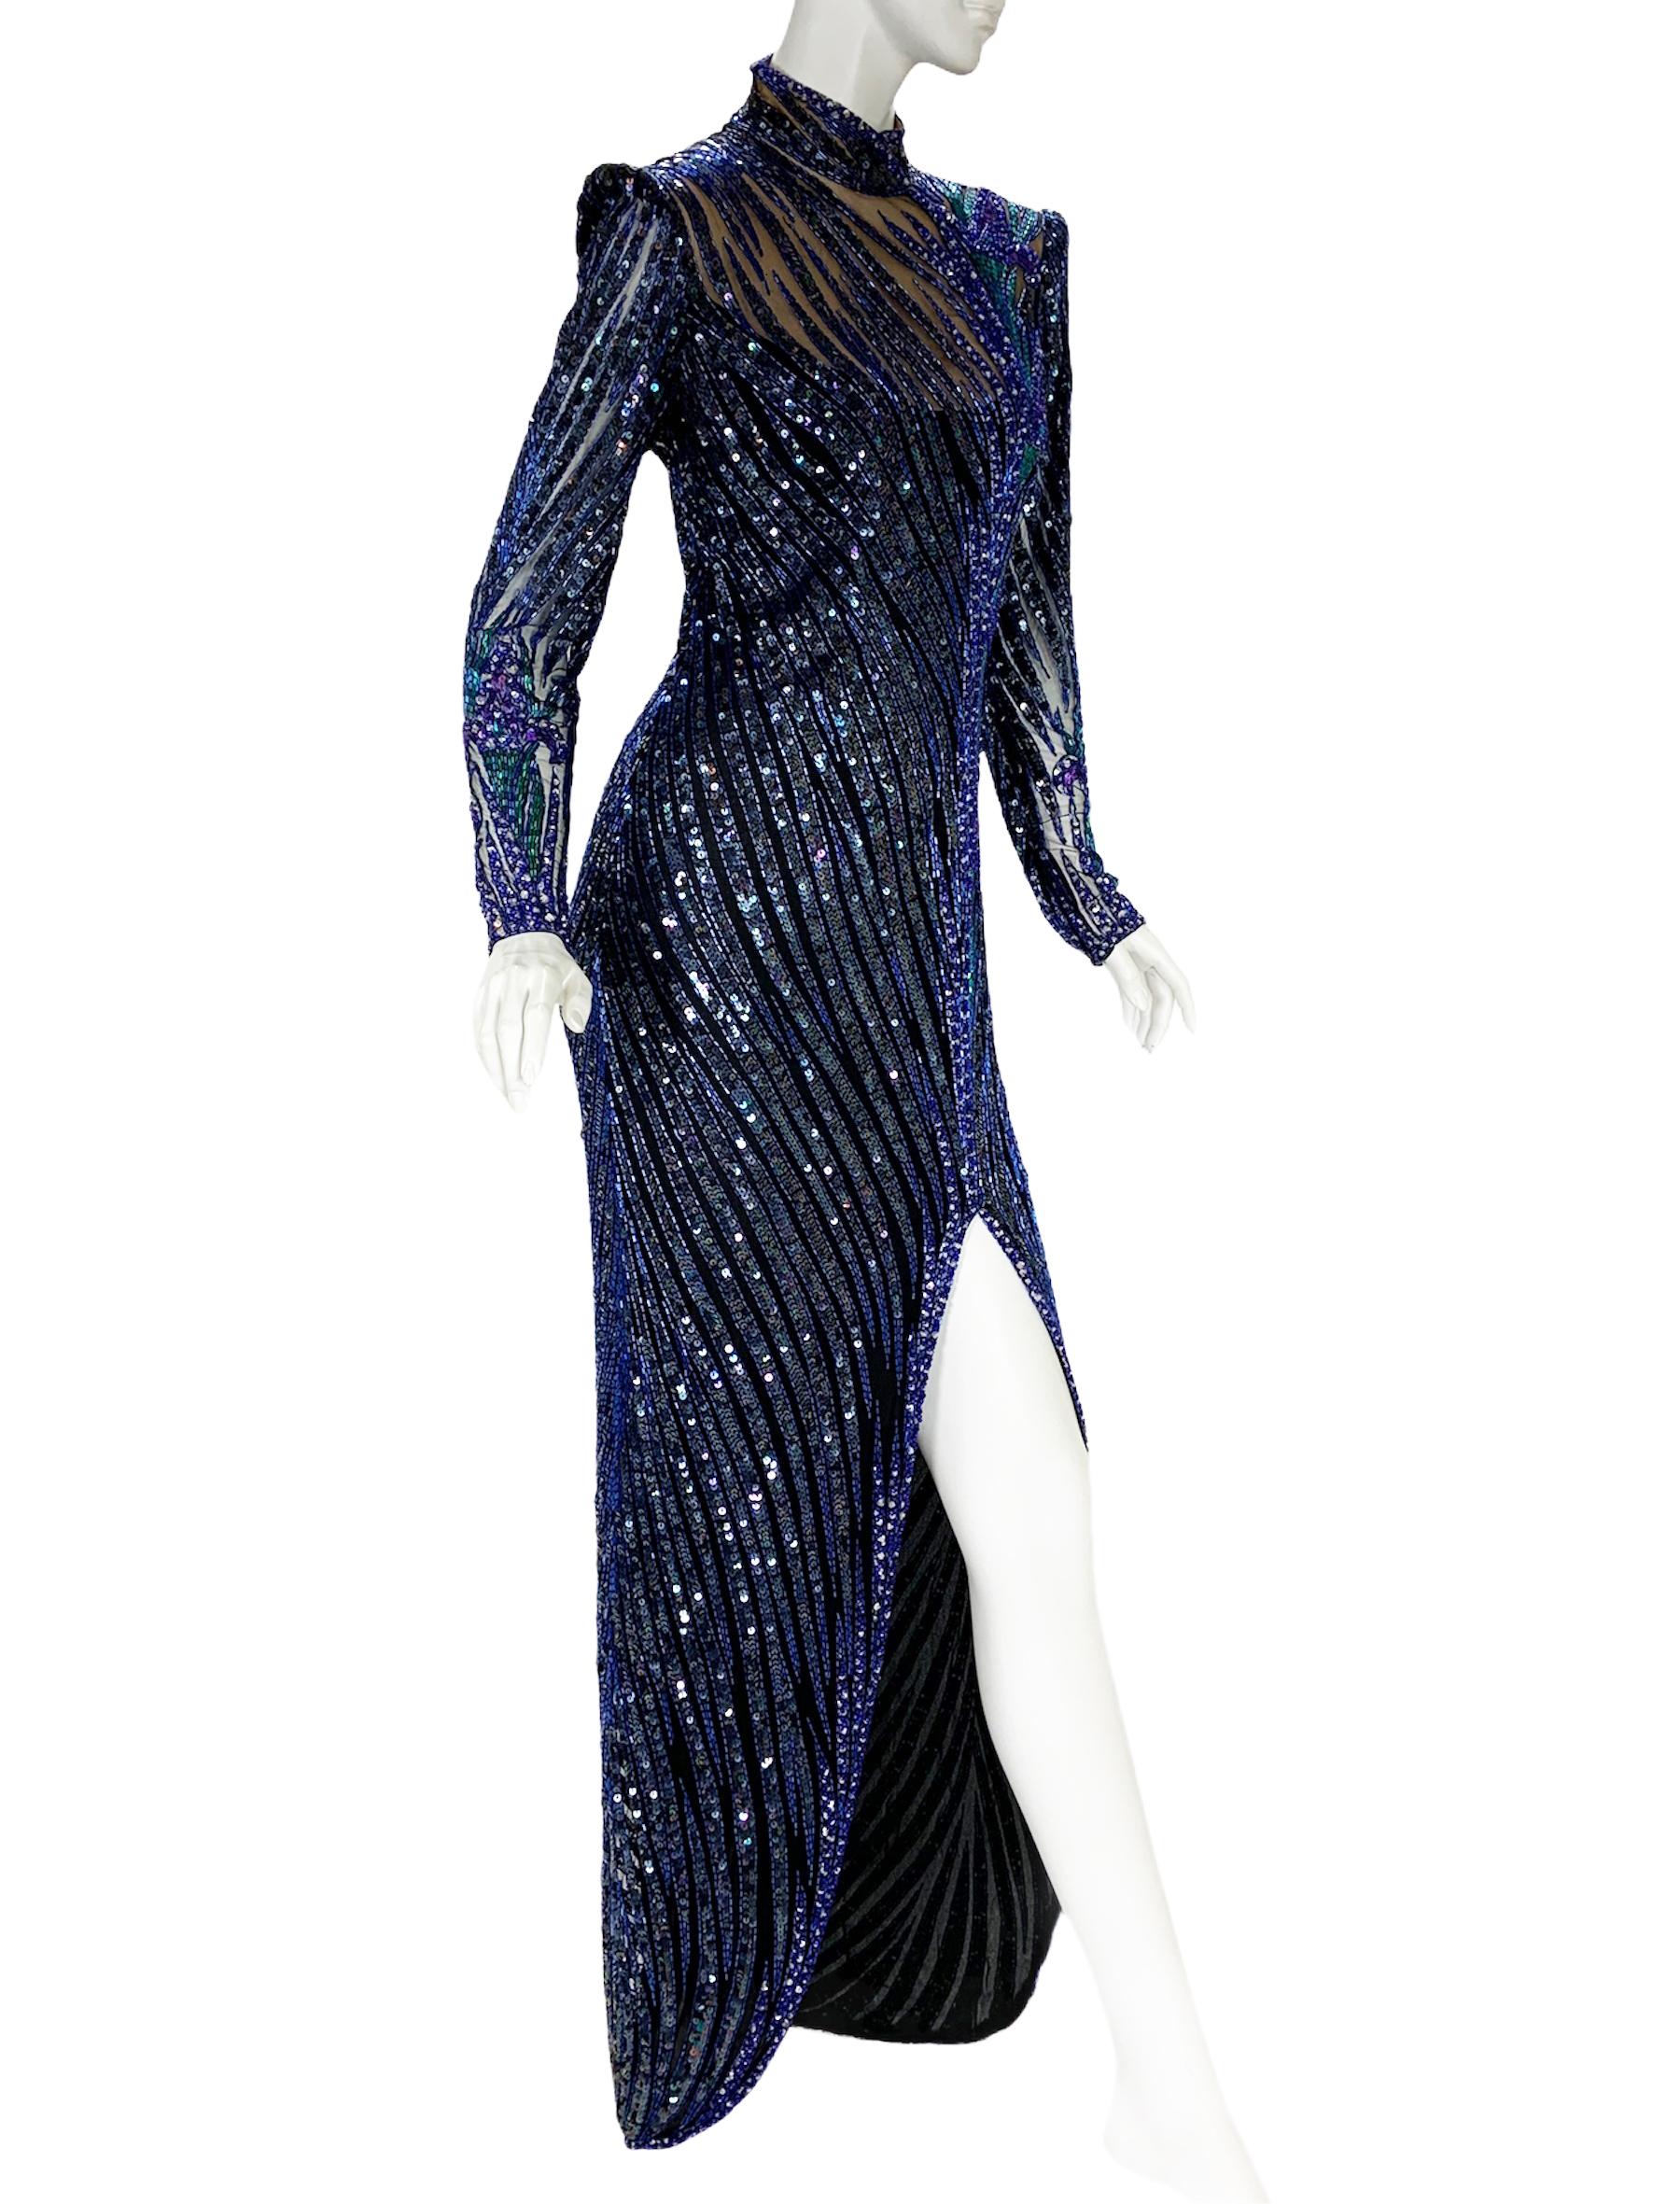 Vintage Bob Mackie Fully Embellished Long Dress Gown
Designer size 8 ( modern size will be smaller - pls. check measurements).
Hand Beaded, 100% Silk, Navy Blue Sequins Background, Beaded Purple Iris Flowers Makes this Dress Absolutely Different